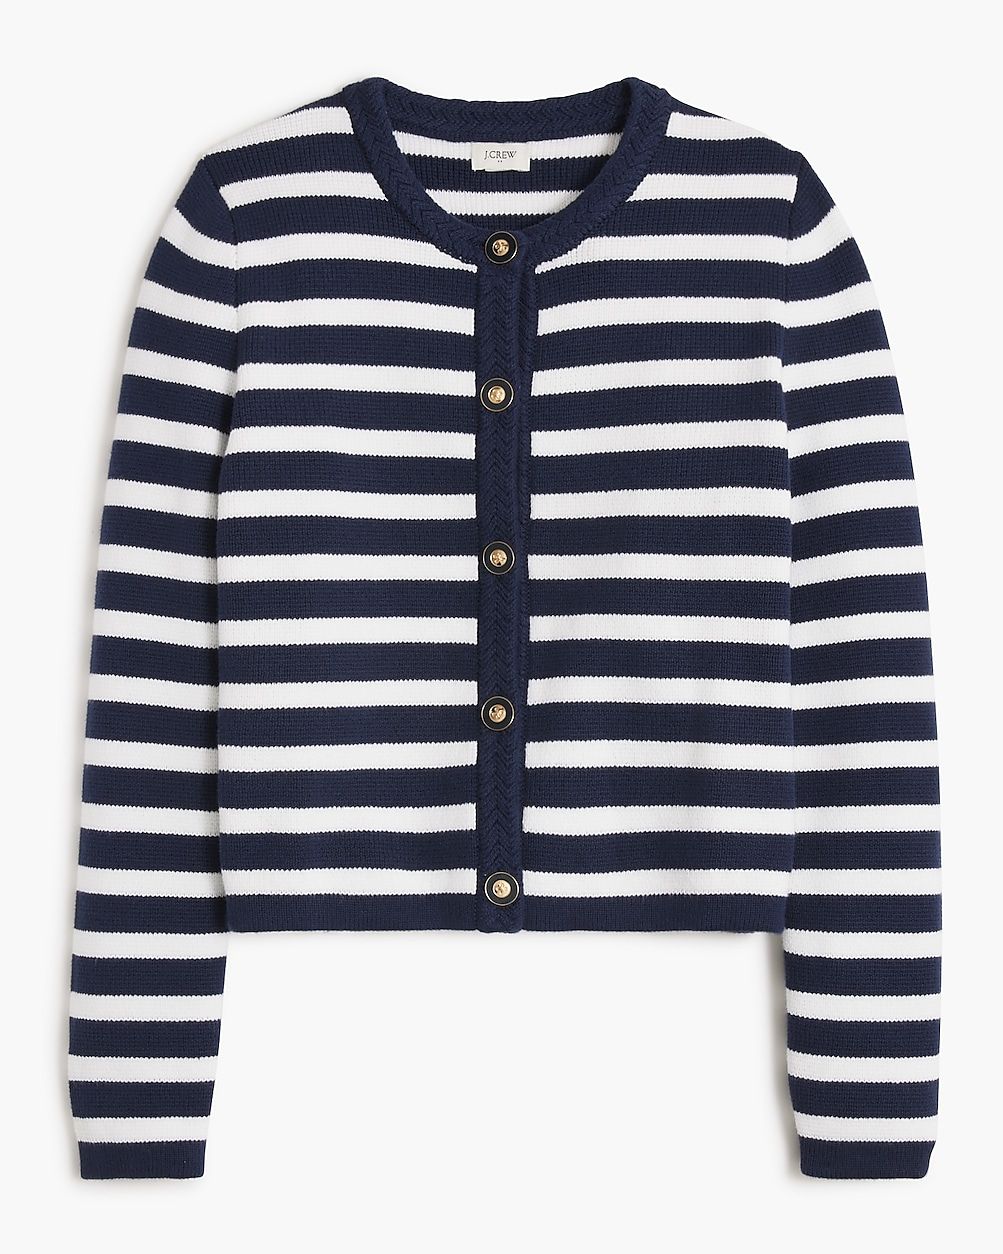 newStriped cotton lady jacket cardigan sweater 1014 people looked at this item in the last day | J.Crew Factory